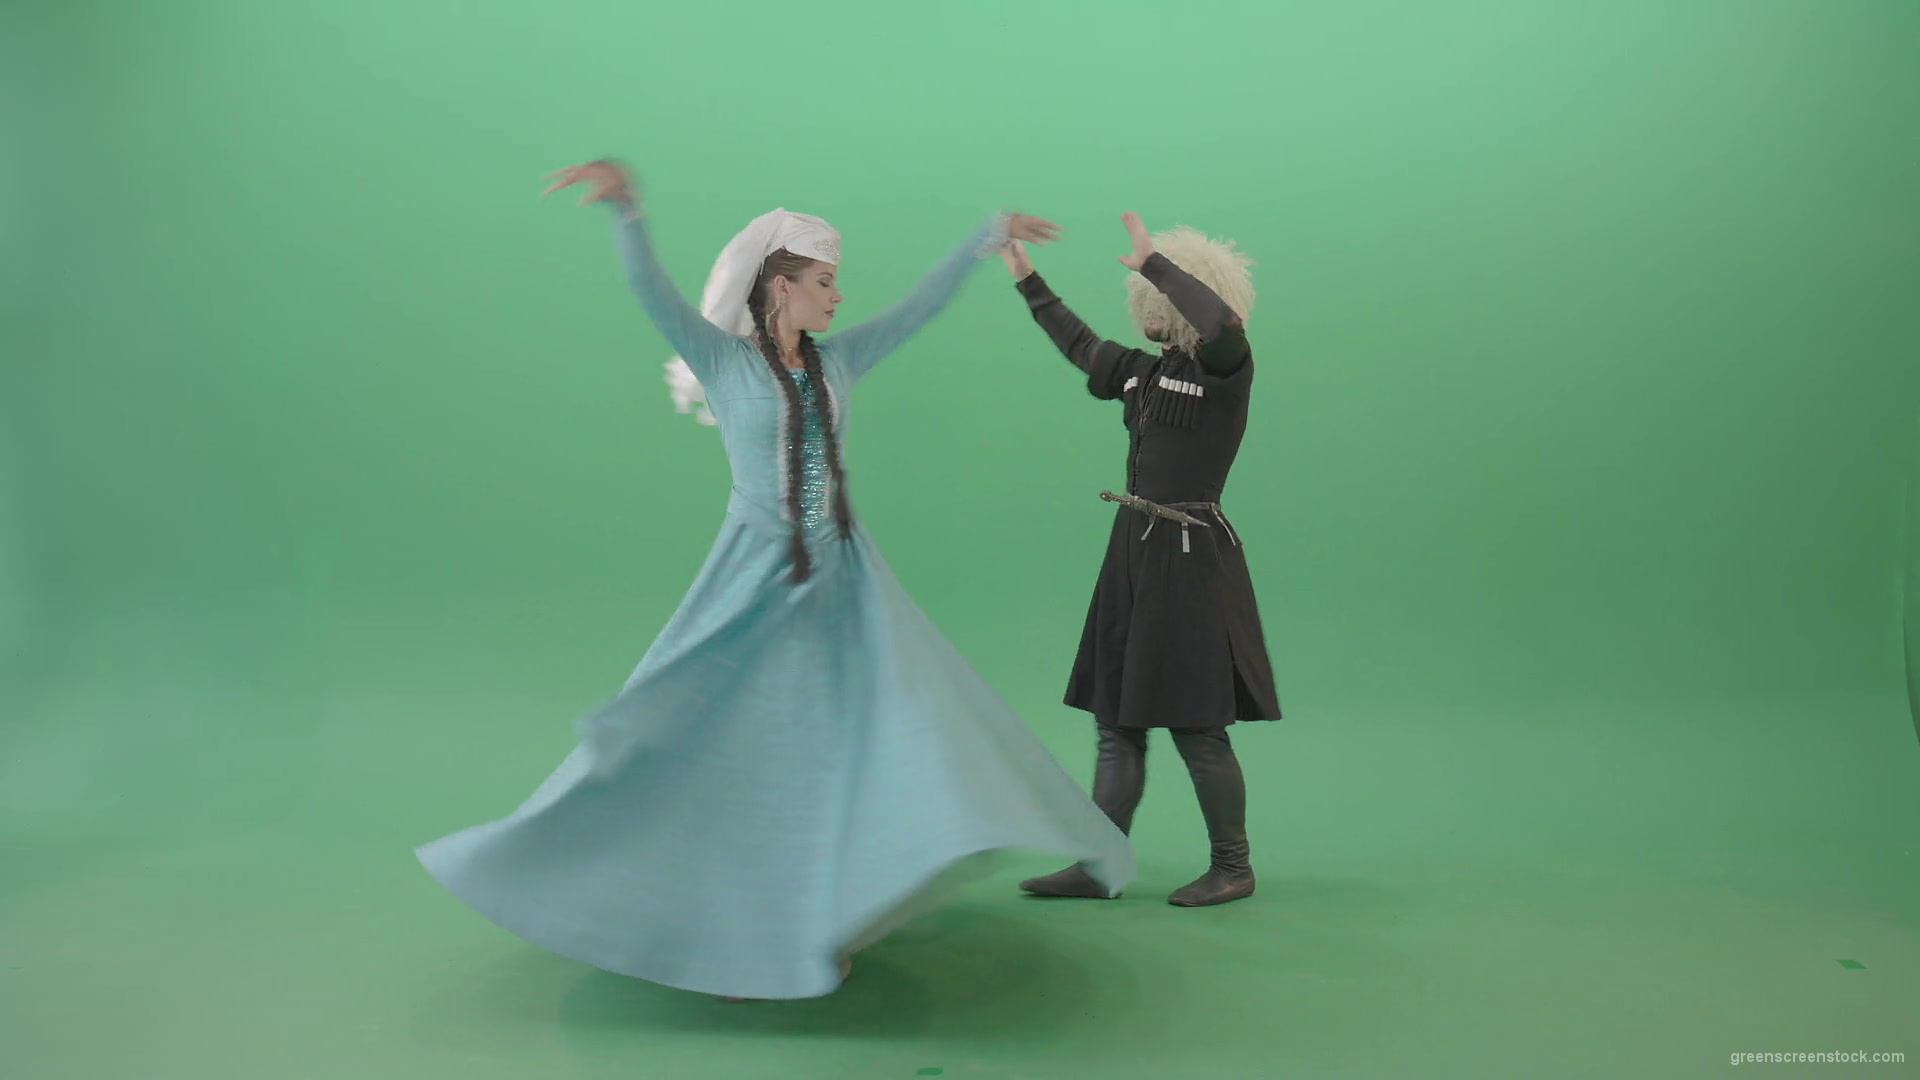 Party-maker-Georgian-Folk-Dance-with-man-and-woman-on-green-screen-4K-Video-Footage-1920_006 Green Screen Stock